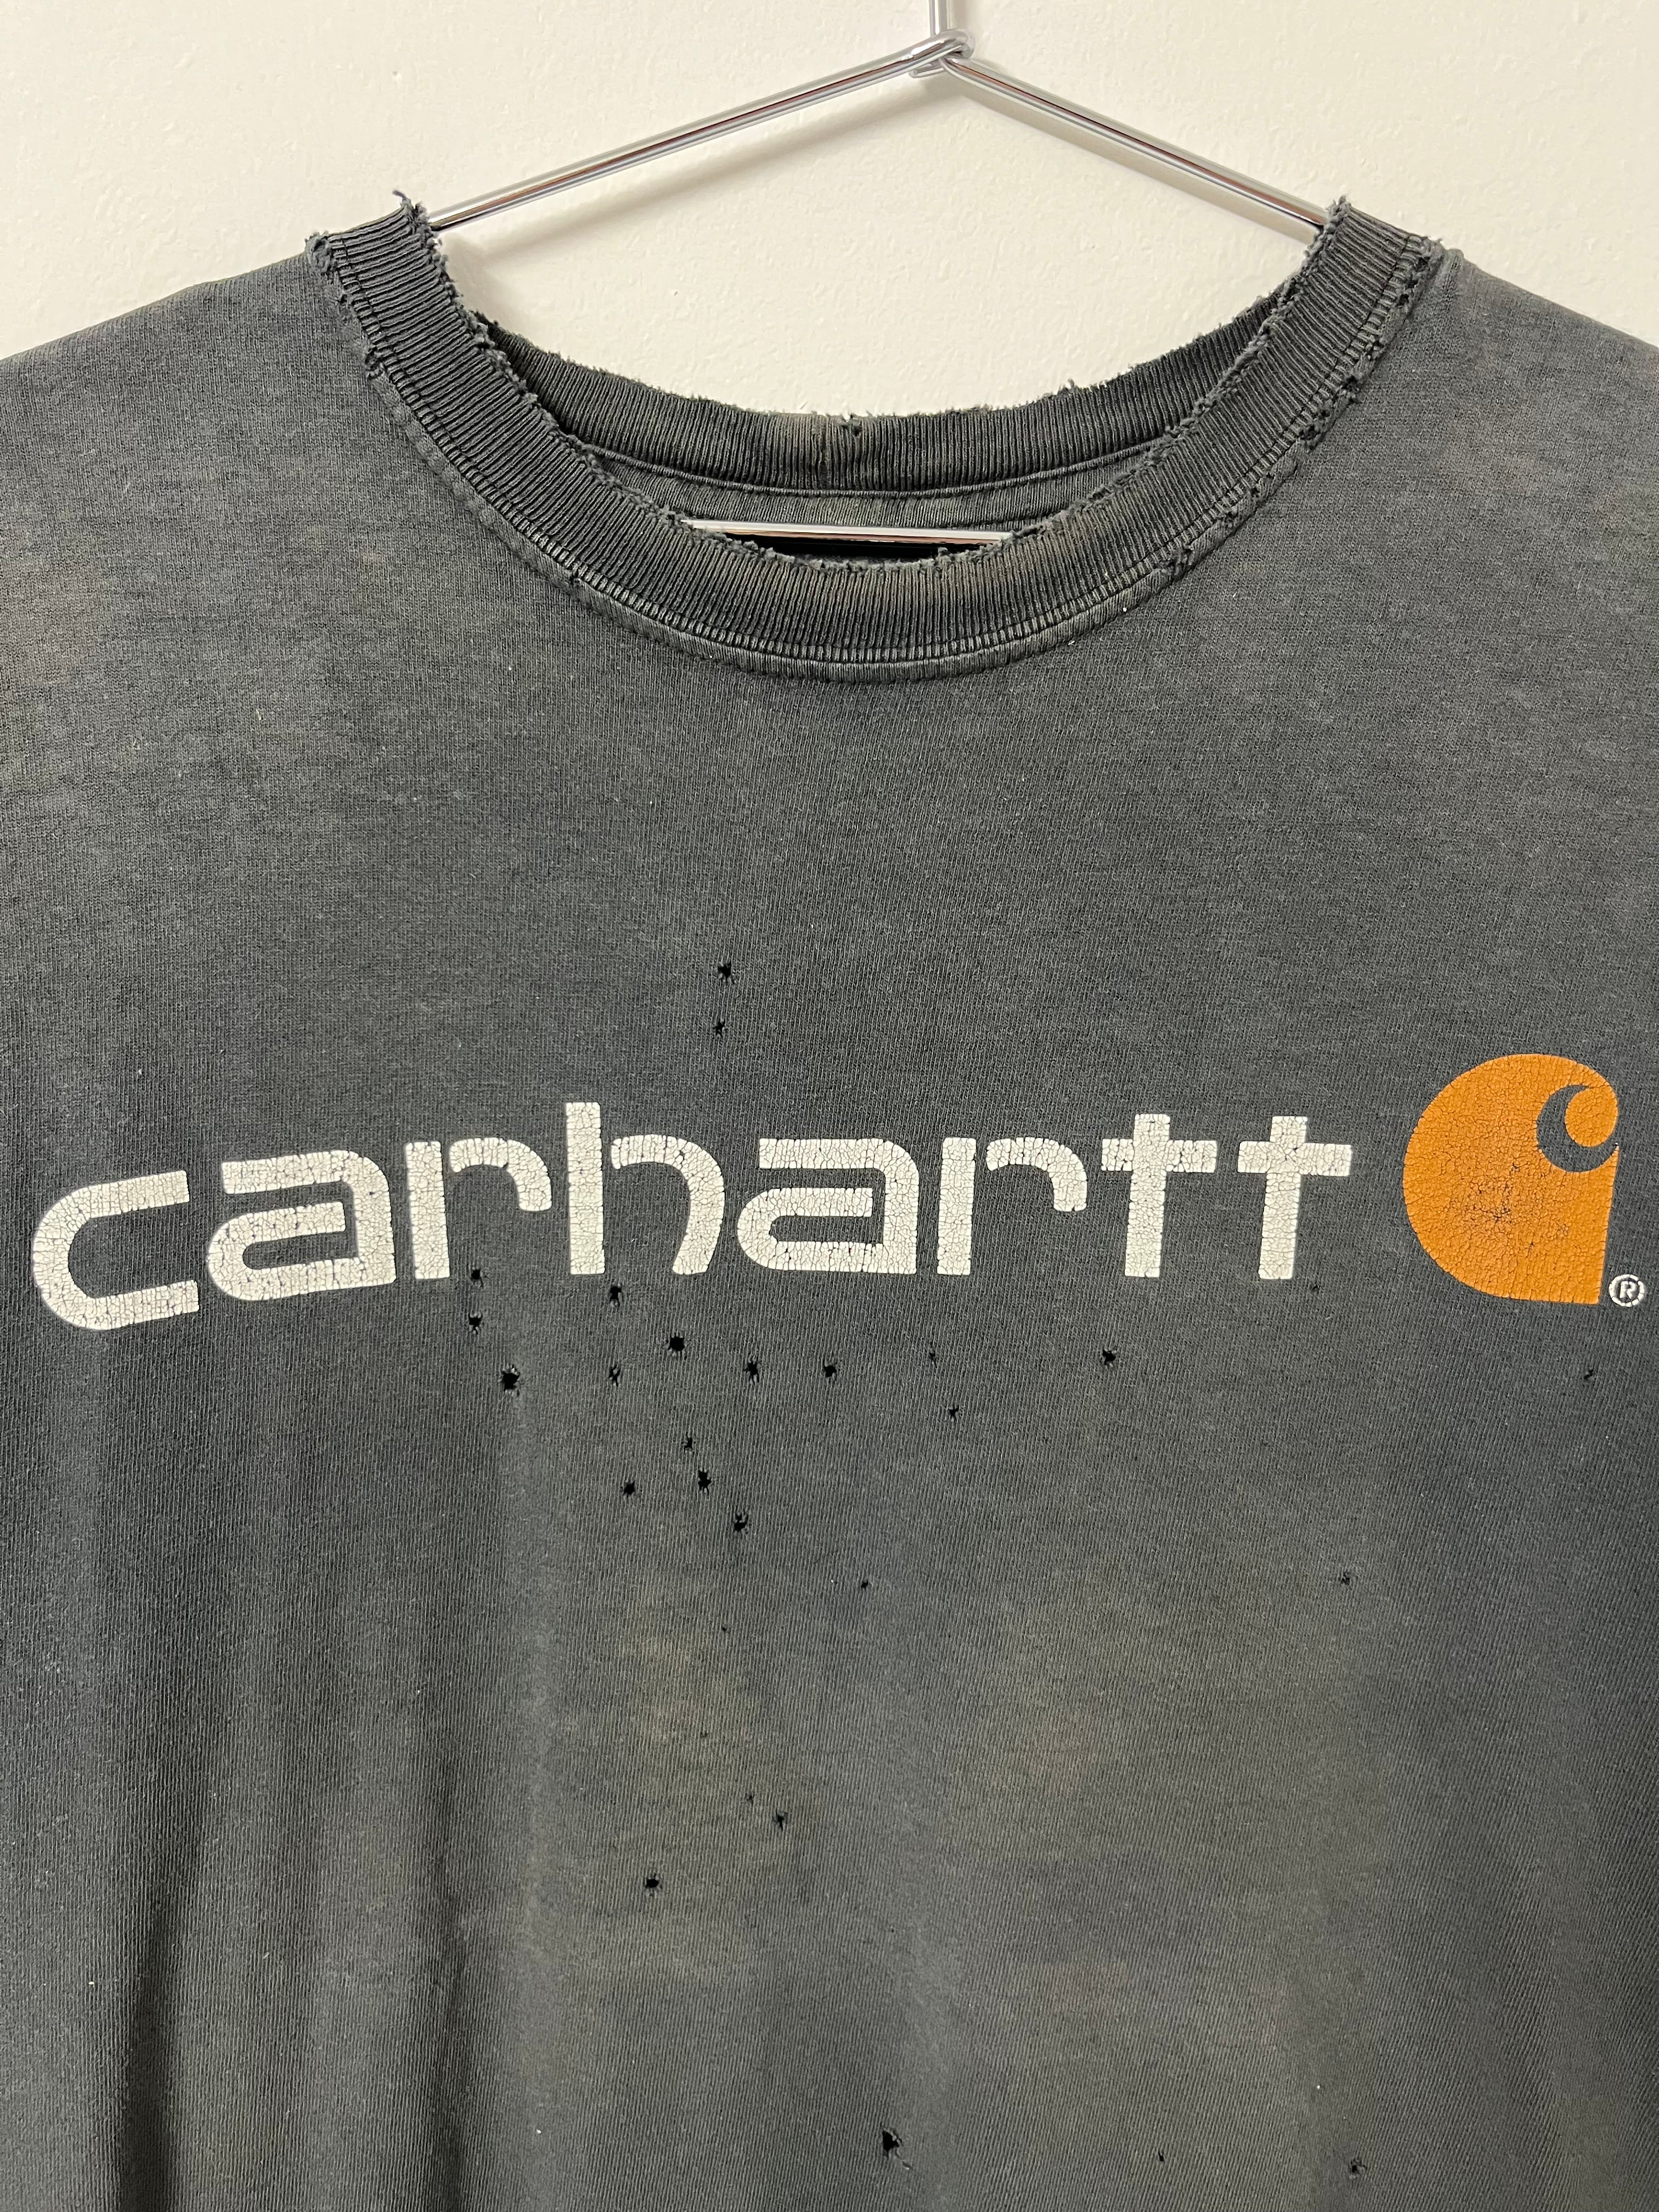 Vintage Trashed Carhartt Logo Graphic Distressed T-Shirt - Faded Black - S/M